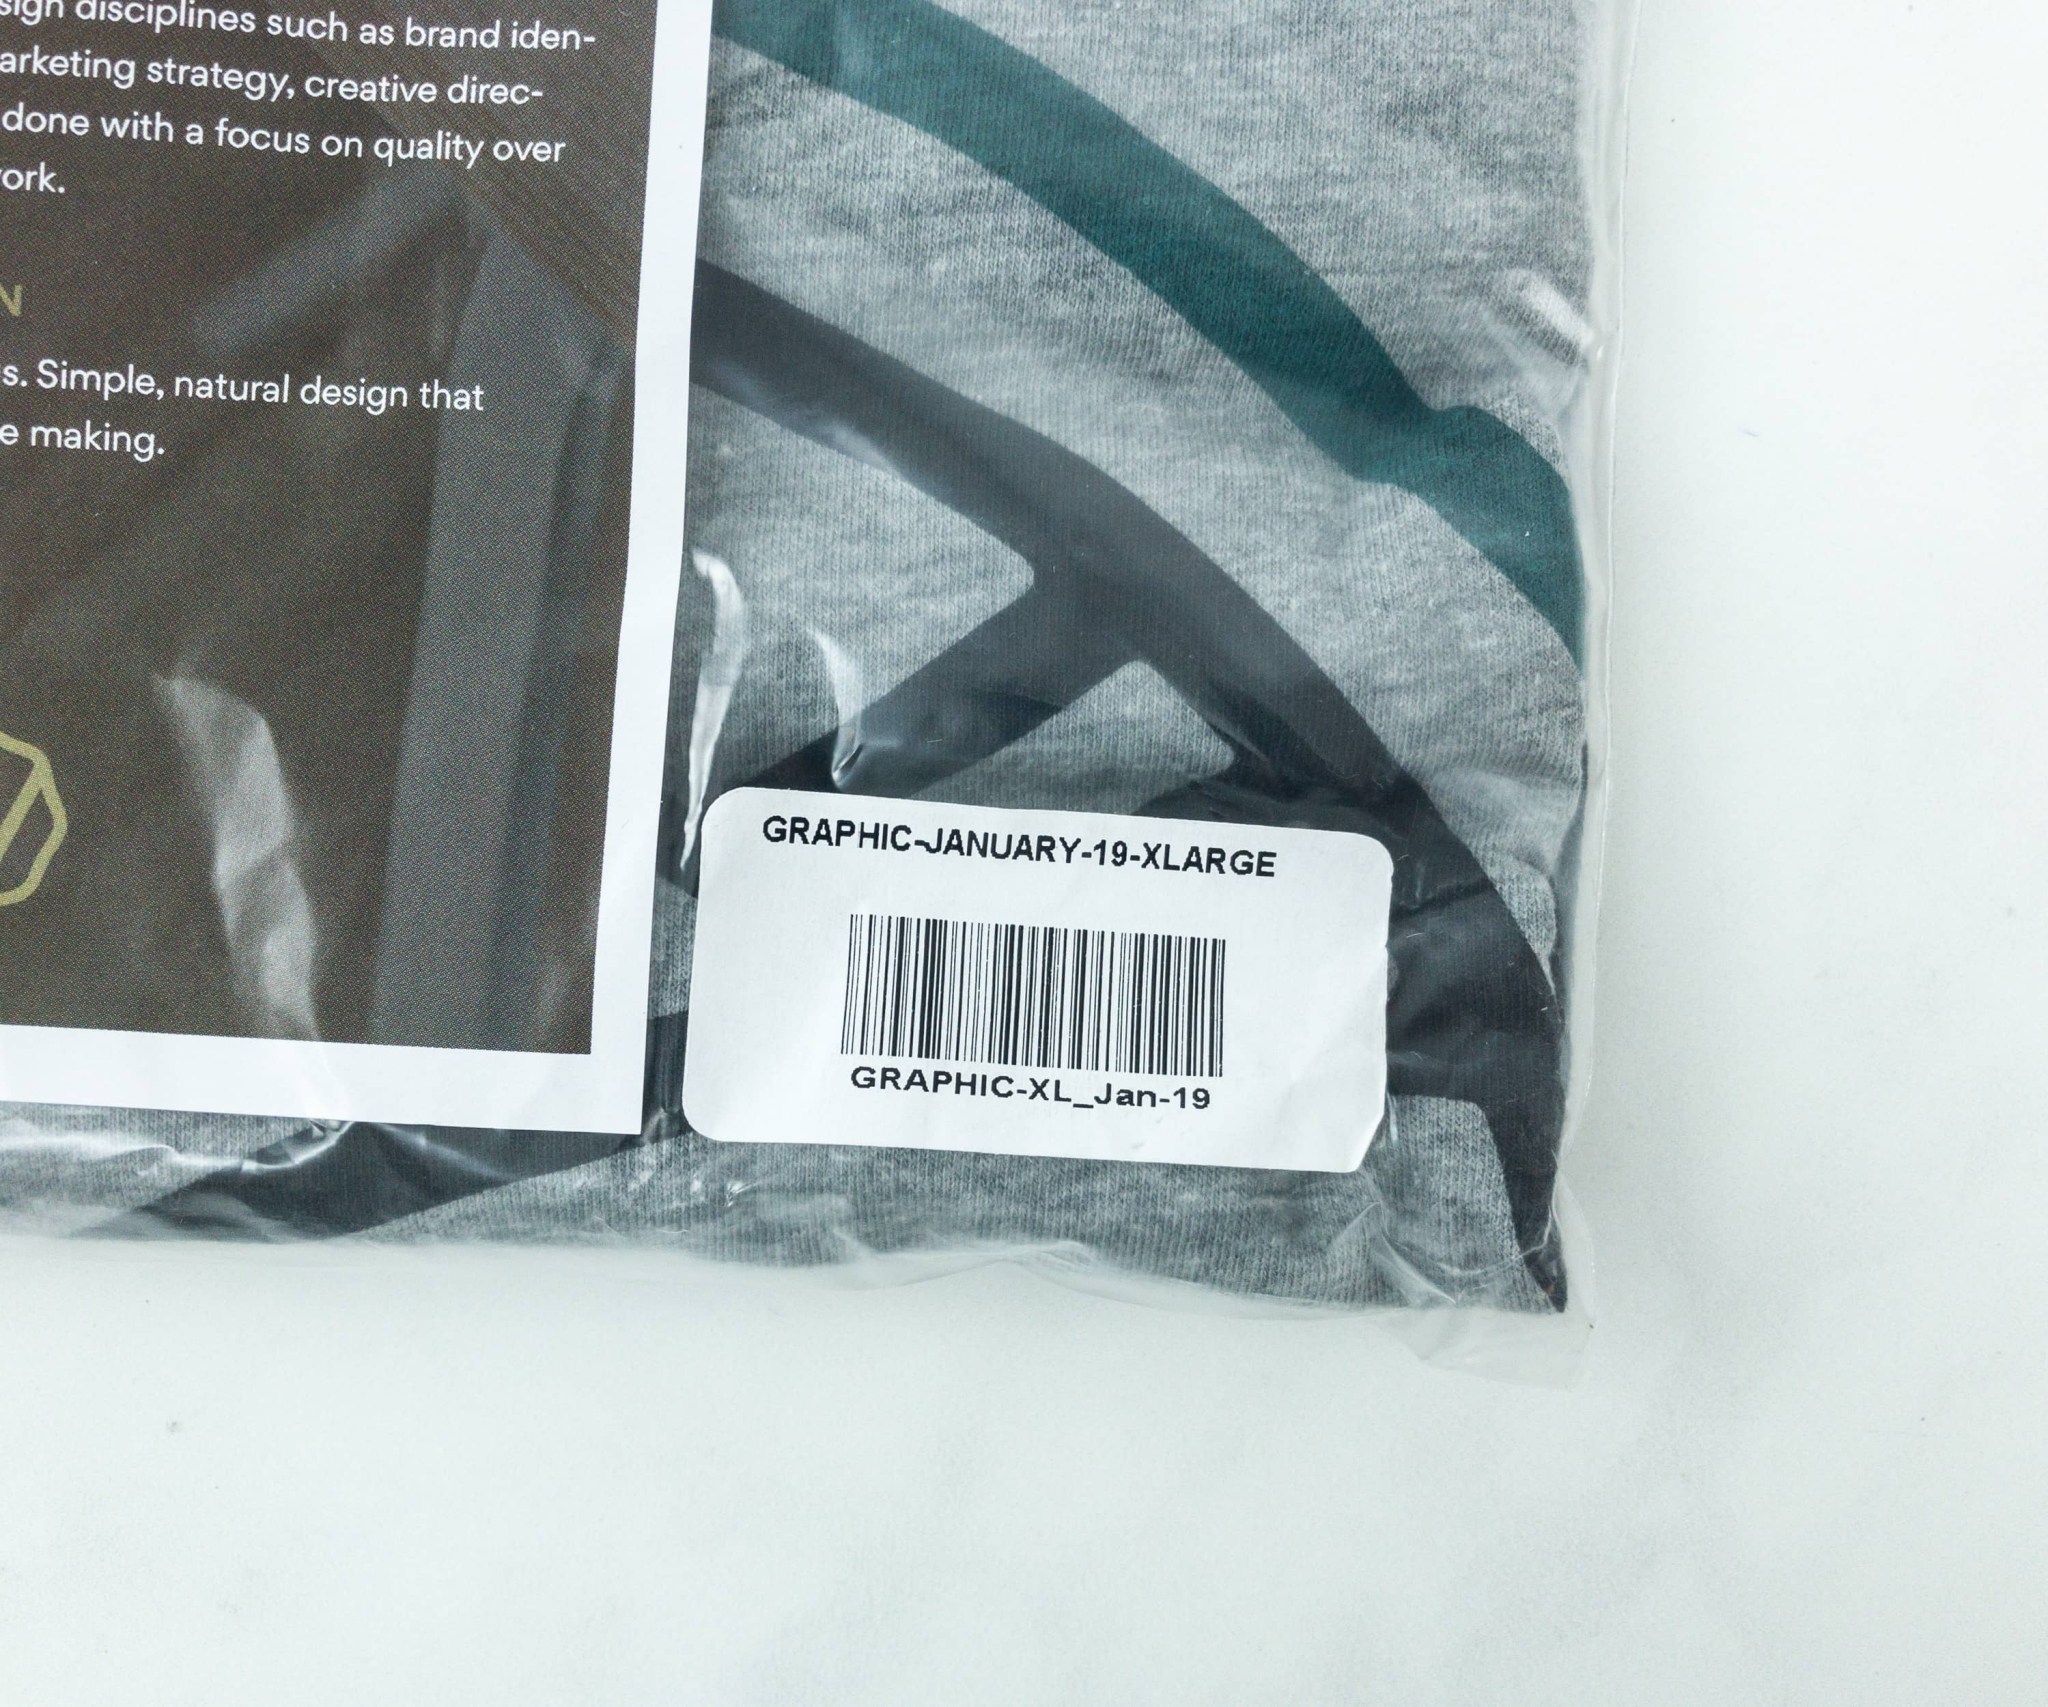 Wohven T-Shirt Subscription Review - January 2019 - hello subscription